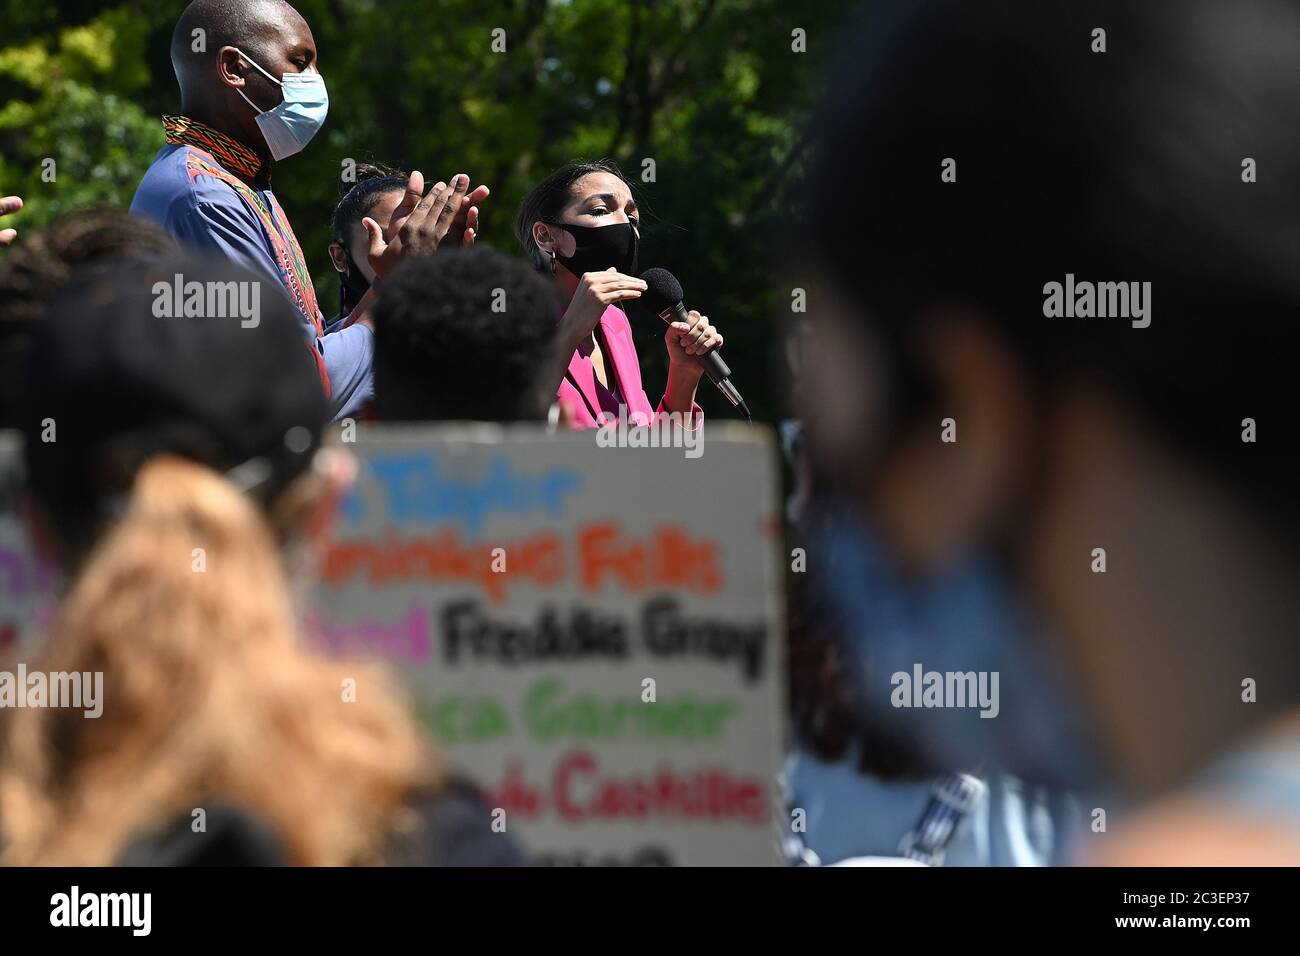 Wearing a mask in the time of COVID-19, U.S. Representative Alexandria Ocasio-Cortez (purple) speaks at a Juneteenth celebration rally in front of the Unisphere in Flushing Meadows-Corona Park in the borough of Queens, New York, June 19, 2020. Juneteenth is celebrated as a commemoration of the ending of slavery in the United States. Credit: Sipa USA/Alamy Live News Stock Photo